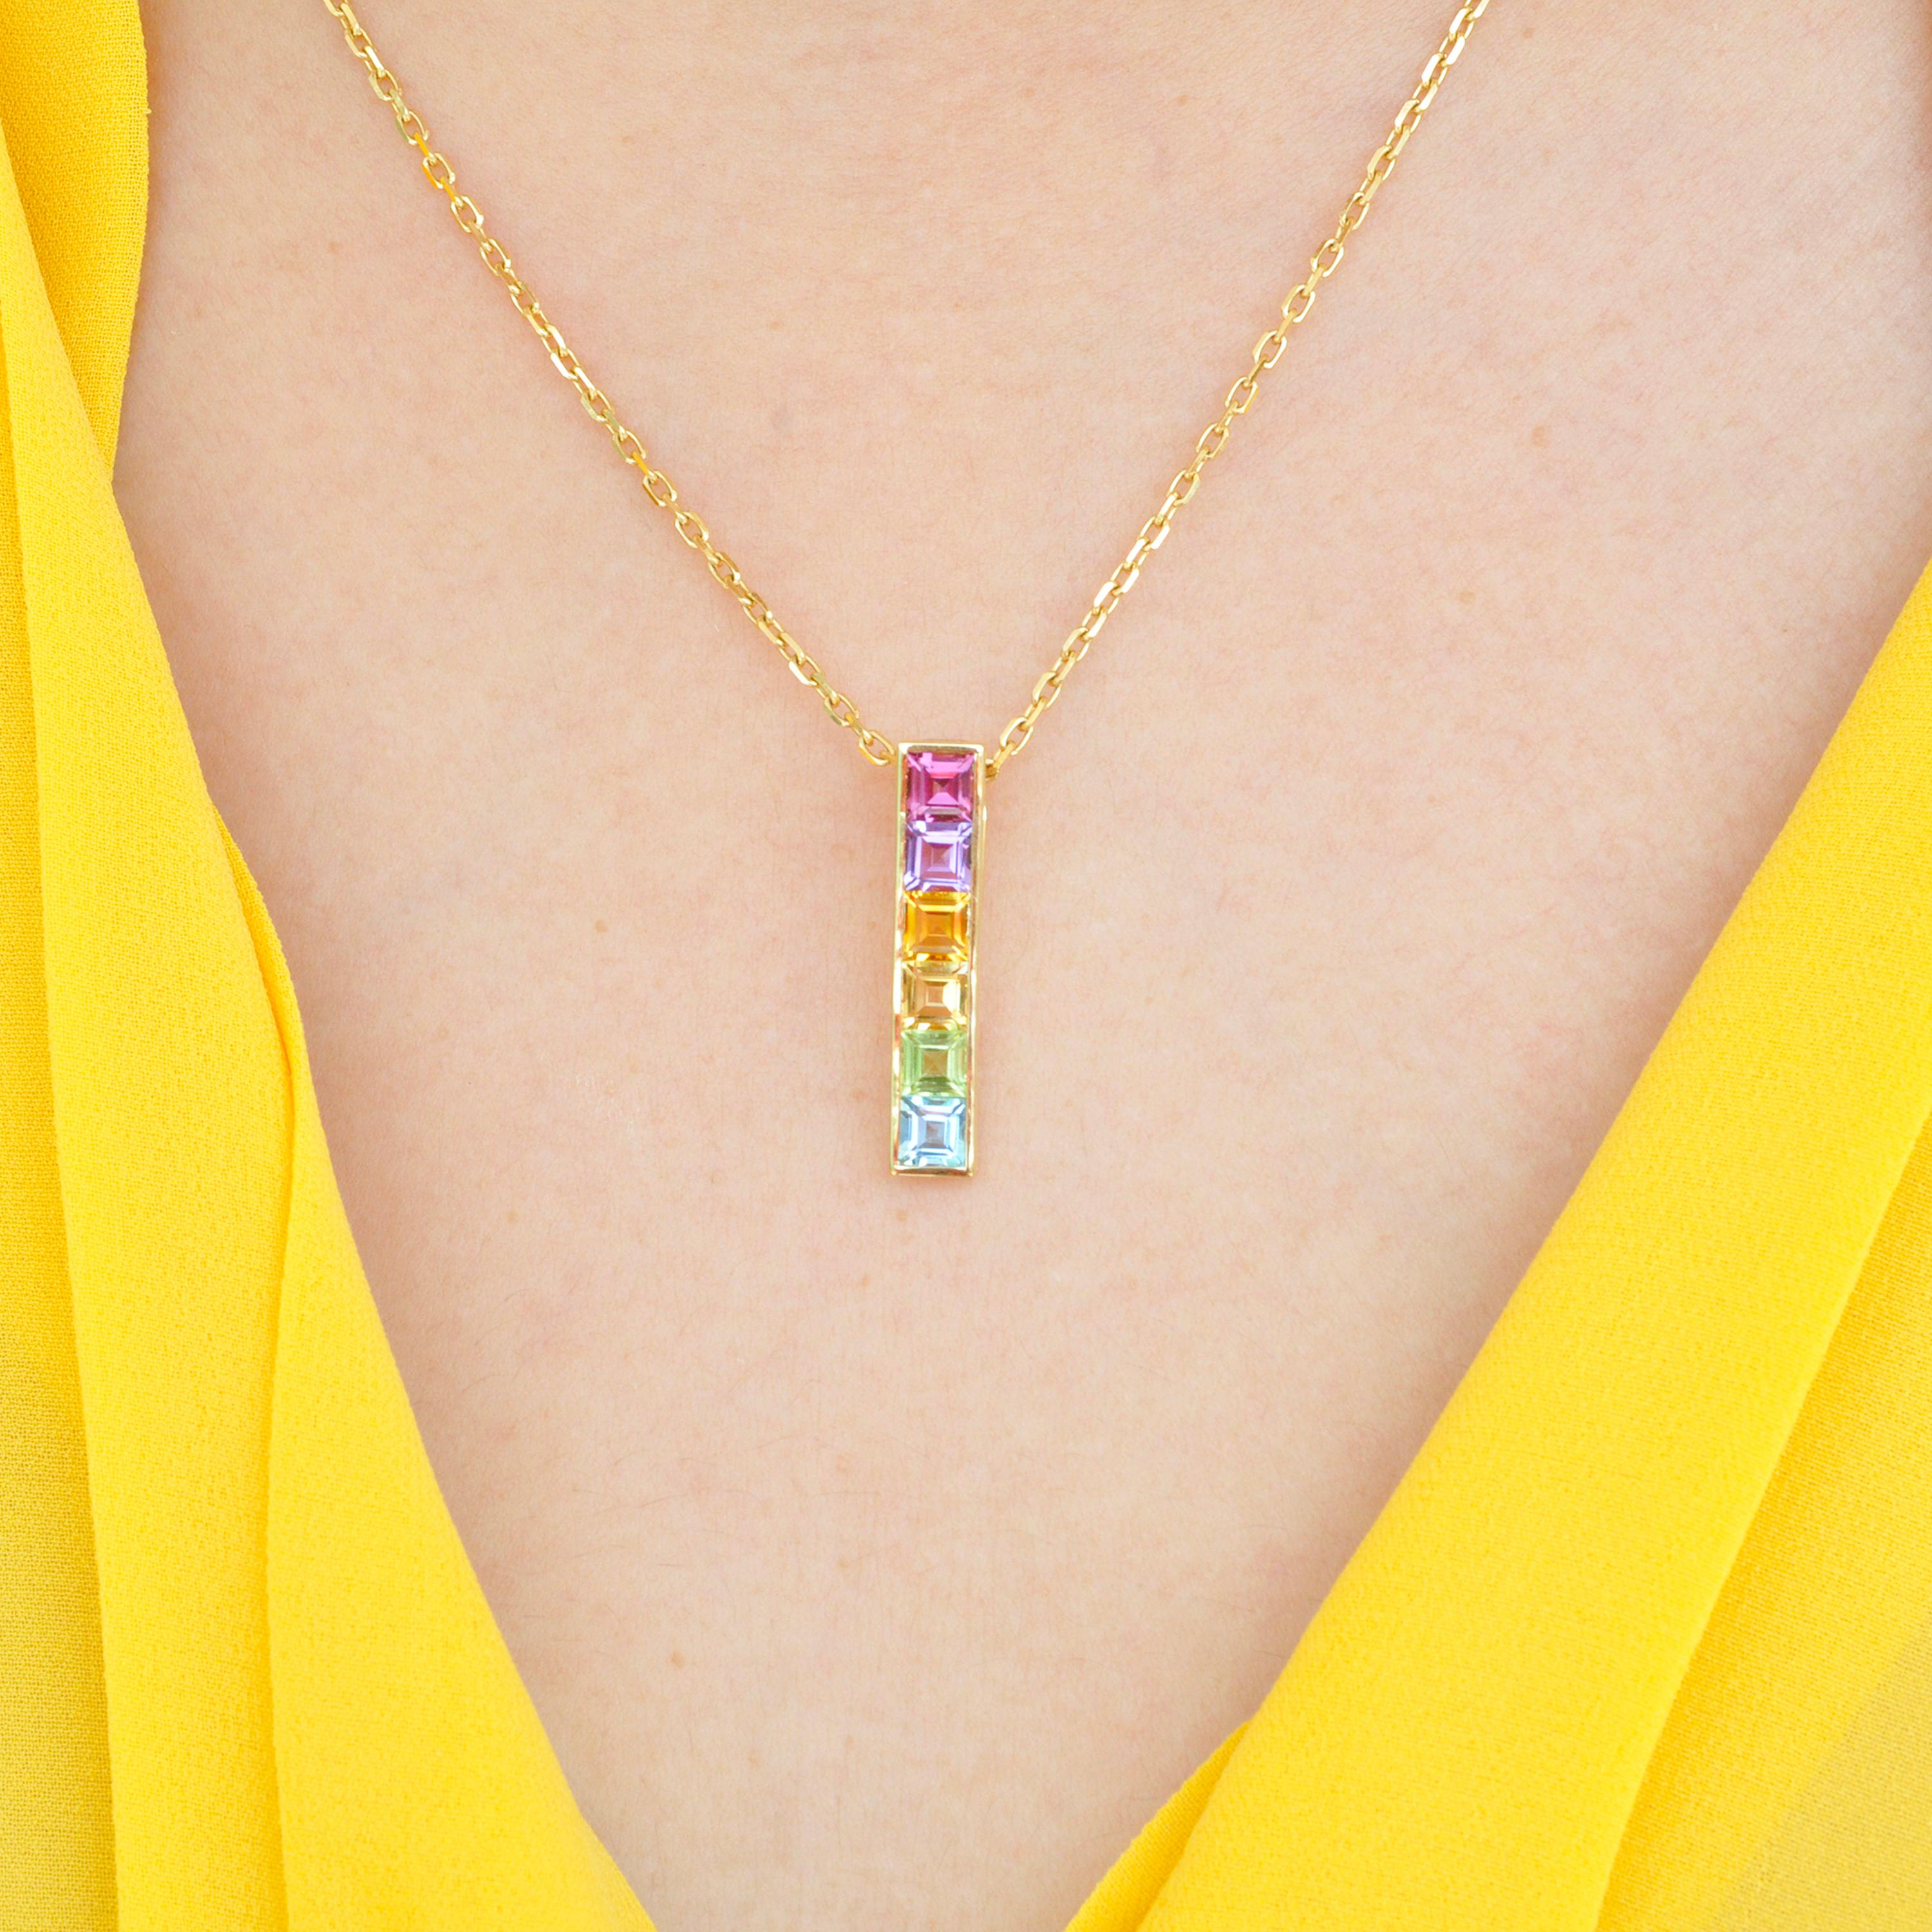 18 karat yellow gold multicolour linear rainbow bar pendant necklace

Add something special to your jewellery box with the Multicolour Rainbow Bar Pendant. Set in 18 Karat gold, this classic linear design features channel set natural gemstones like